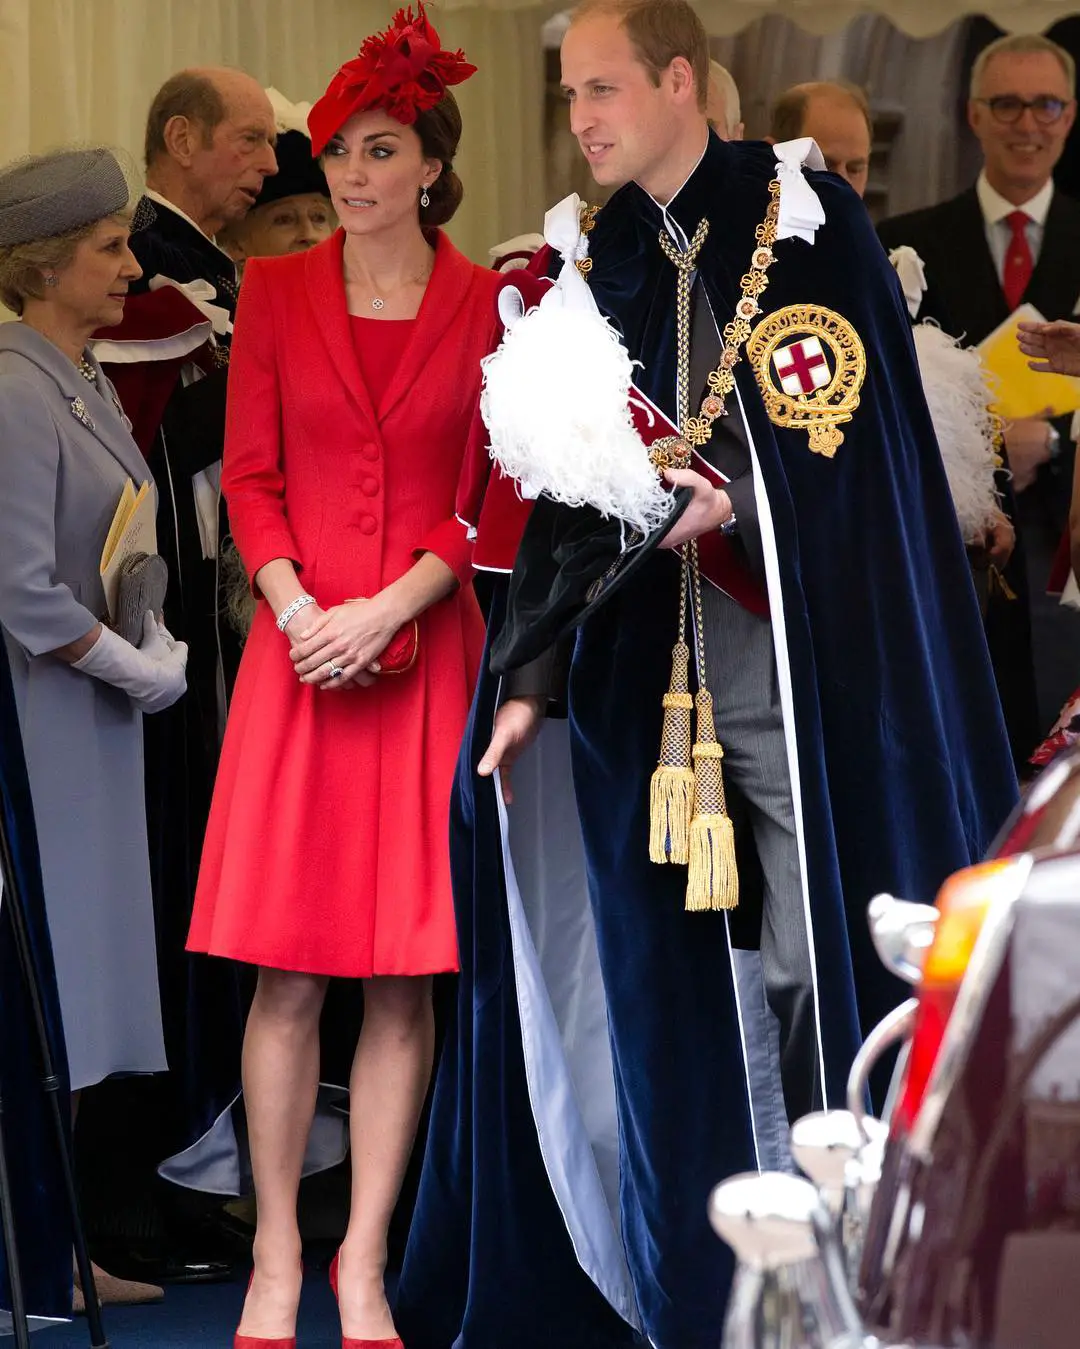 The Duchess of Cambridge wore red Catherine Walker coat at the Order of Garter Service in 2016